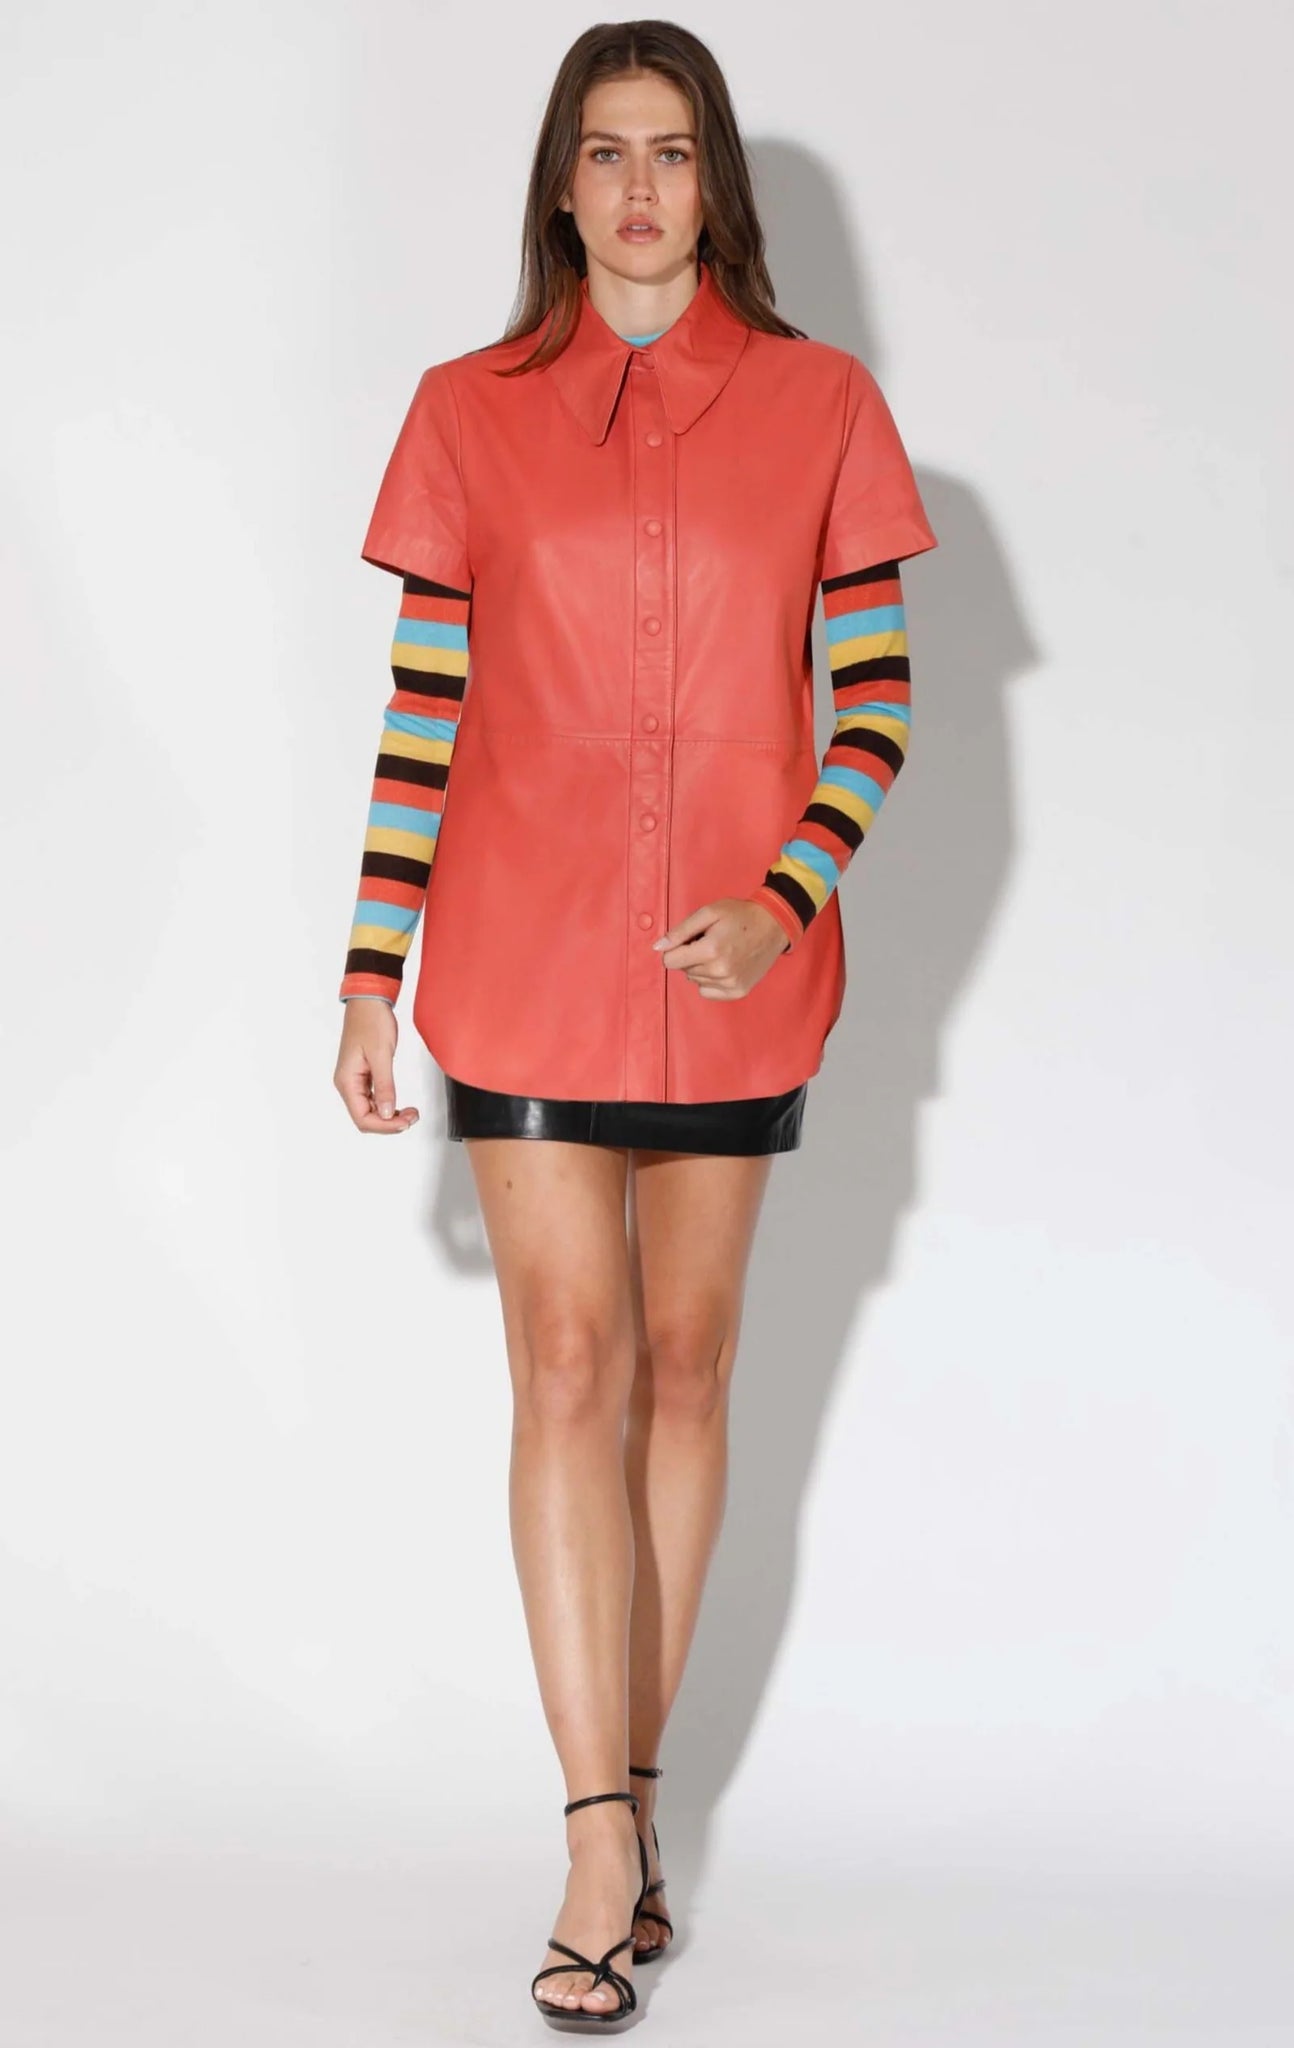 Walter Baker Laney Leather Top in Coral